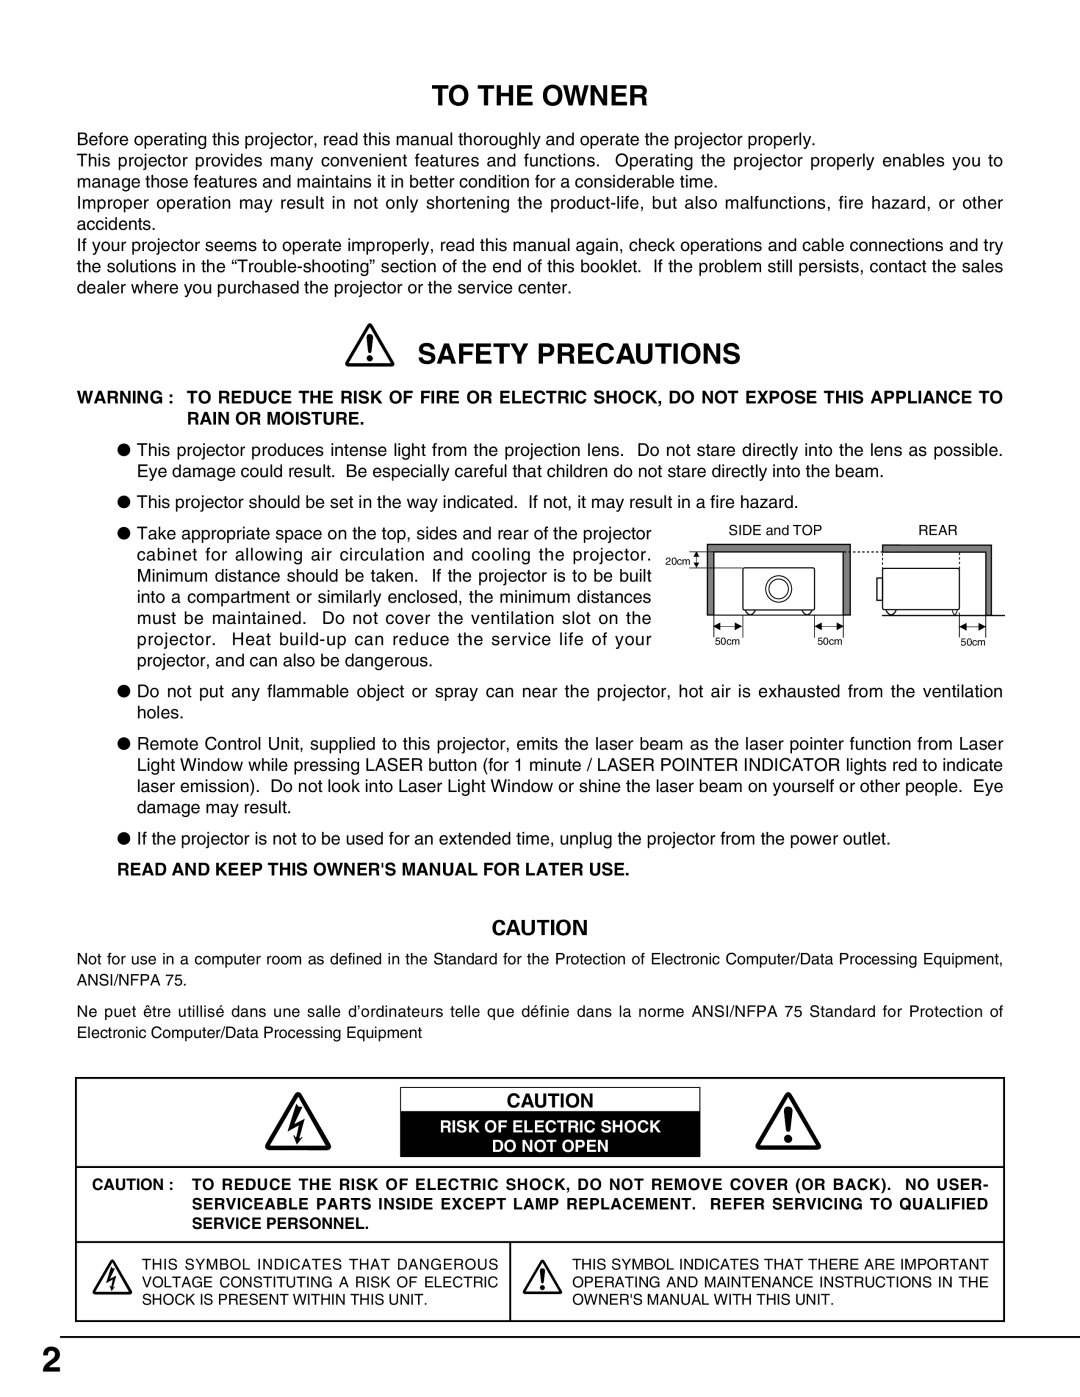 Eiki LC-X60 instruction manual To The Owner, Safety Precautions 